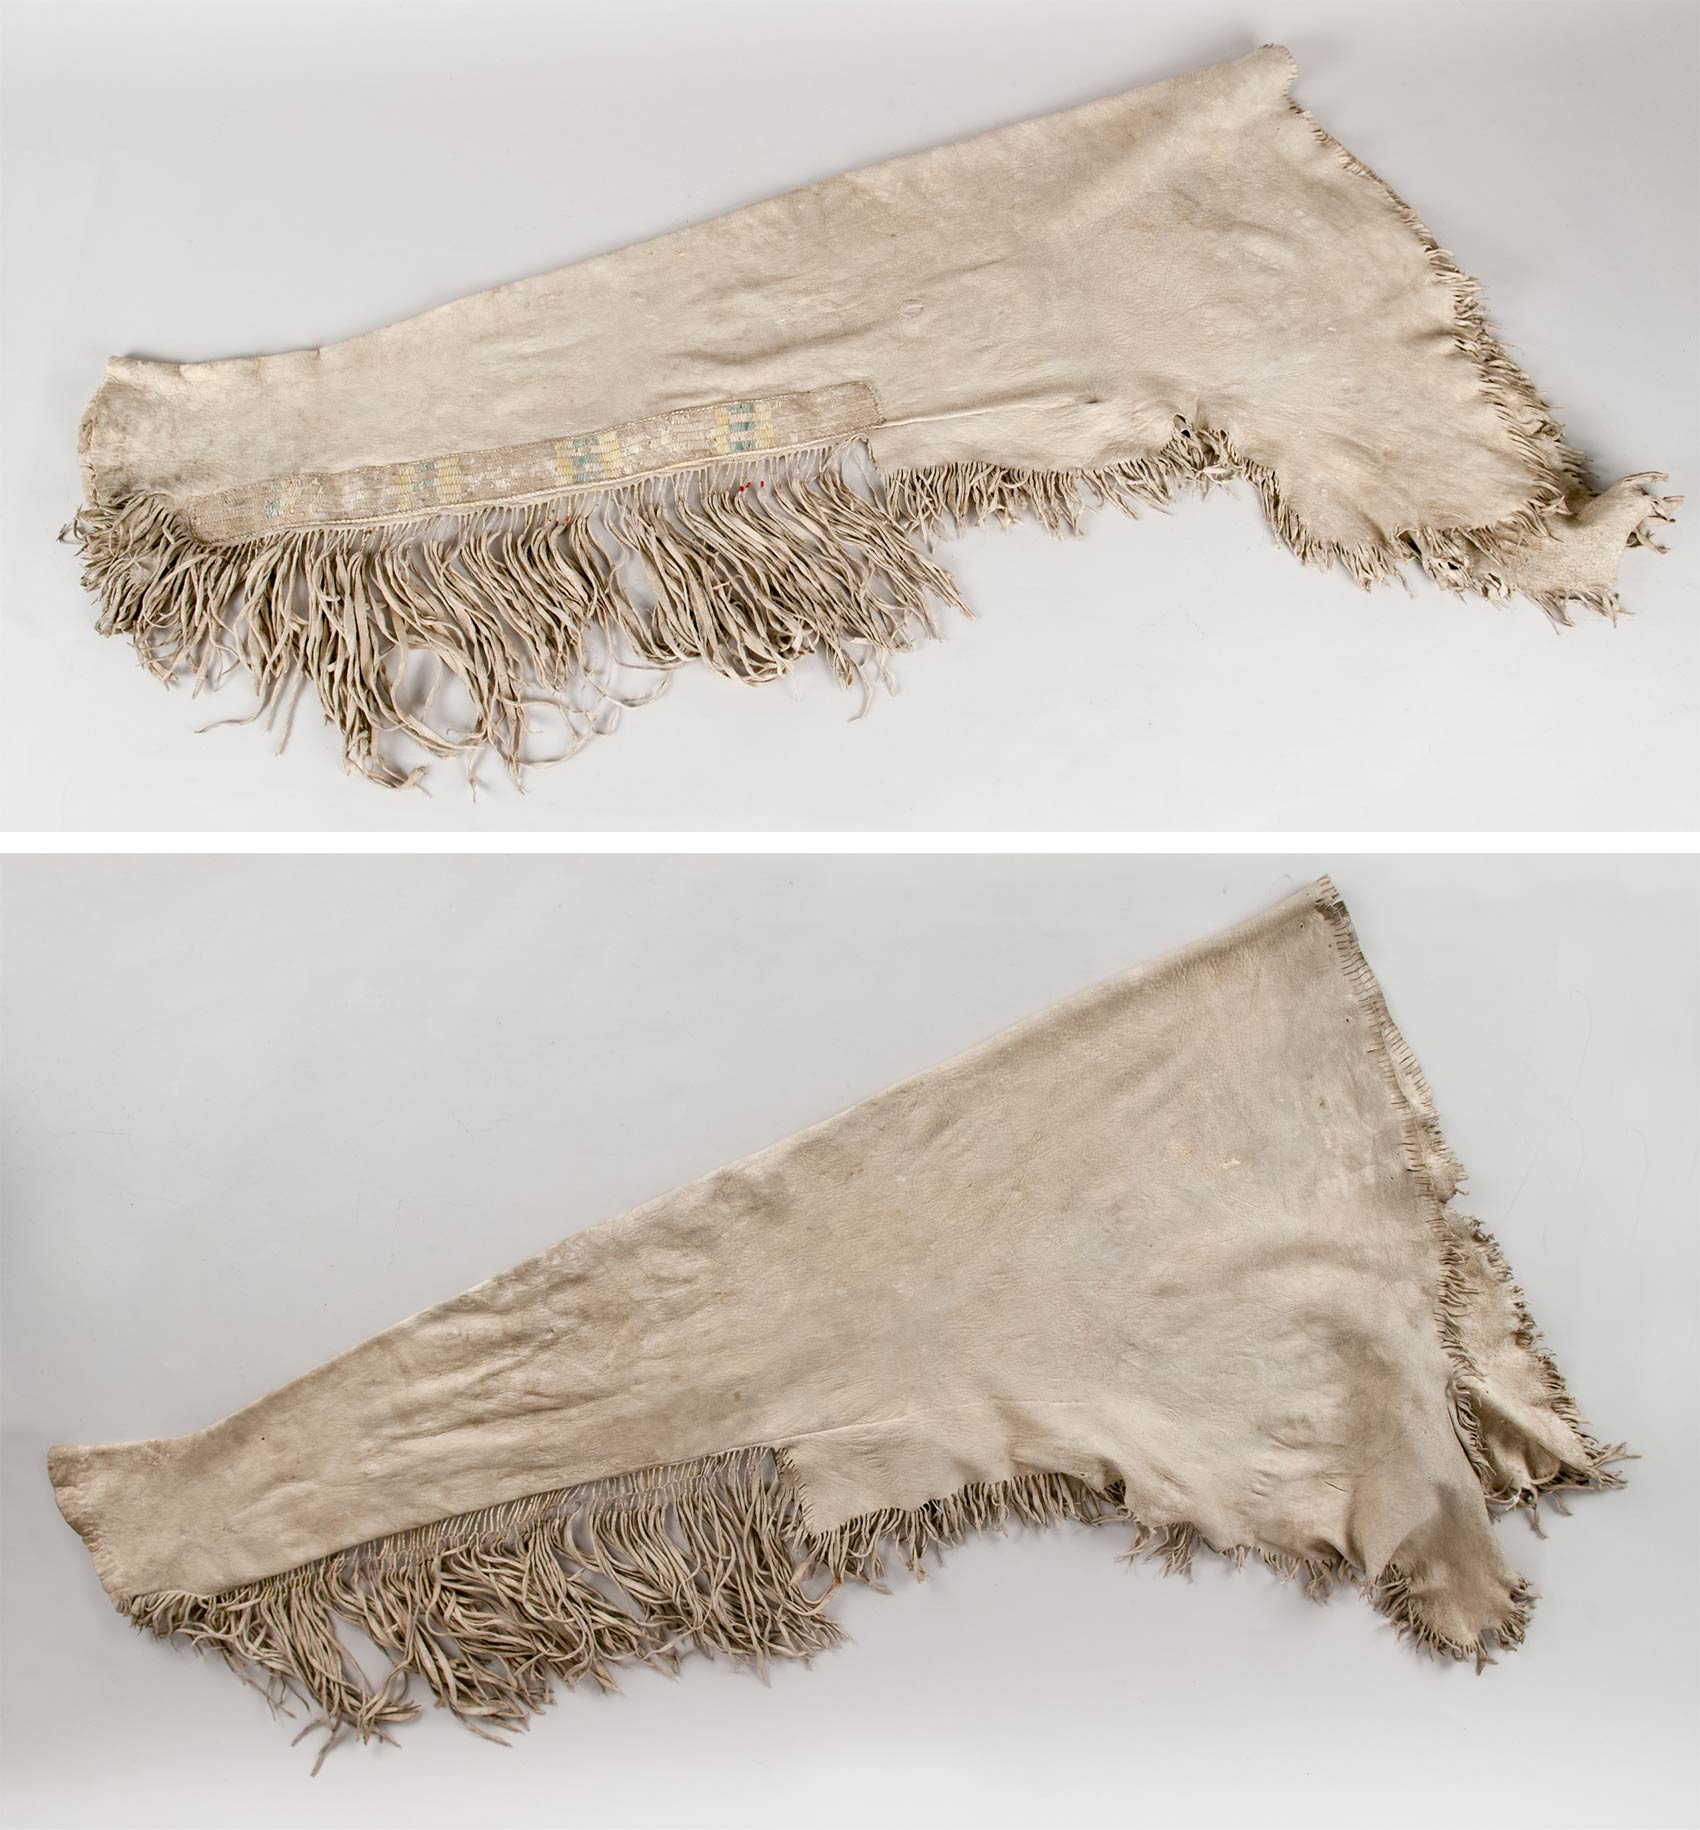 Pair of men's leggings made from cured unsmoked deerskin with porcupine quill decorated side panels and fringe decorations.